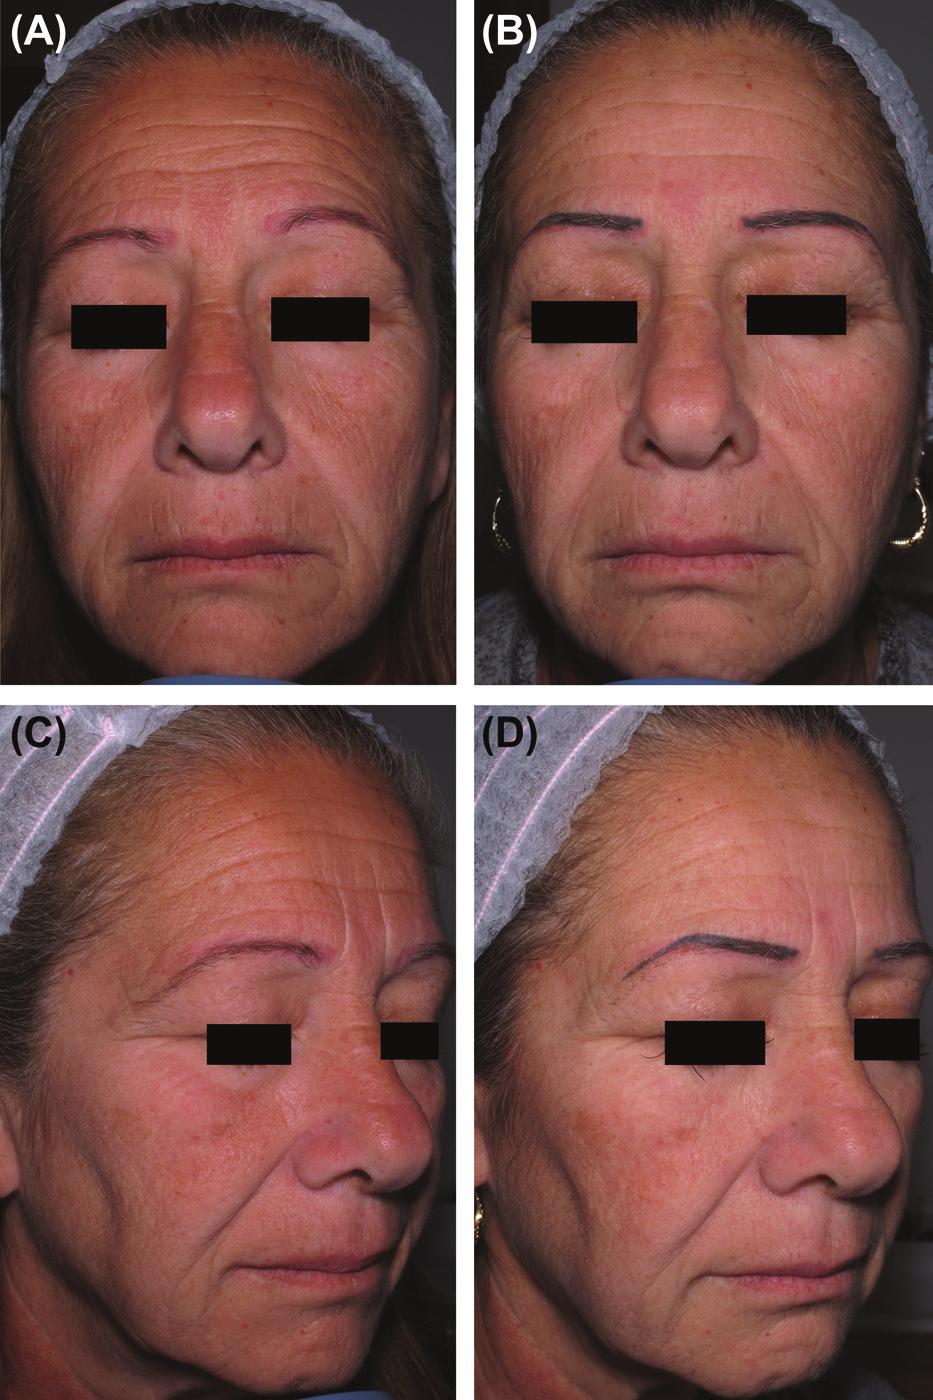 6 M. ELMAN ET AL. Figure 10. Periorbital treatment. (A,C) Before and (B,D) after 1 month from the 2nd treatment session with D tip, 14-ms single-pulse one pass.